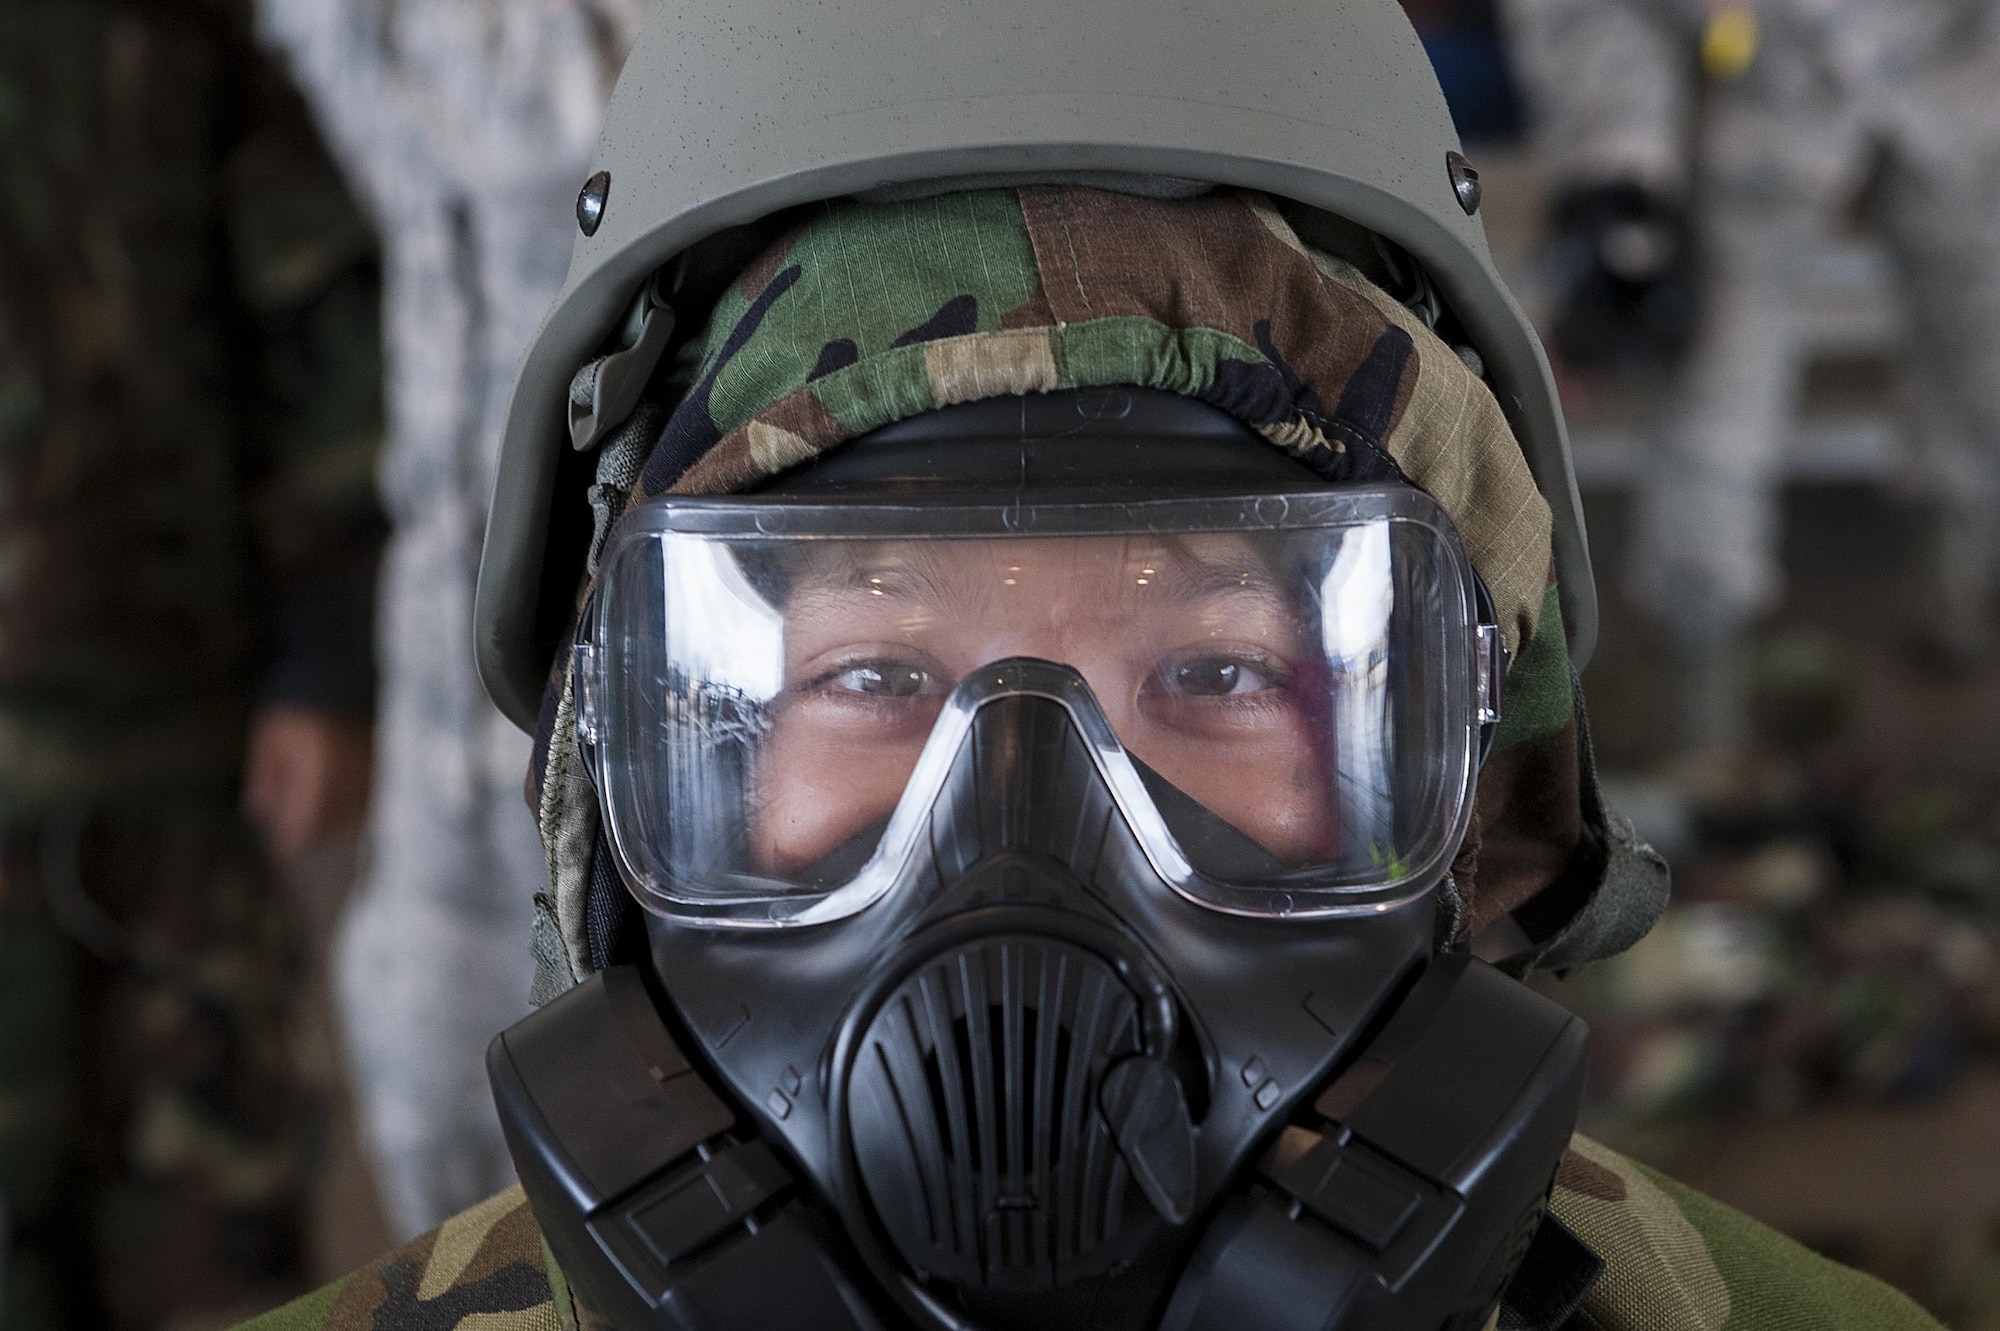 A child tries on a gas mask and mission oriented protective posture (MOPP) gear at Skoshi Warrior Nov. 14, 2015, at Kadena Air Base, Japan. Skoshi Warrior is an annual event designed to help children understand some of the deplyment processes that their military parents go through. (U.S. Air Force photo by Airman 1st Class Corey M. Pettis/Released)